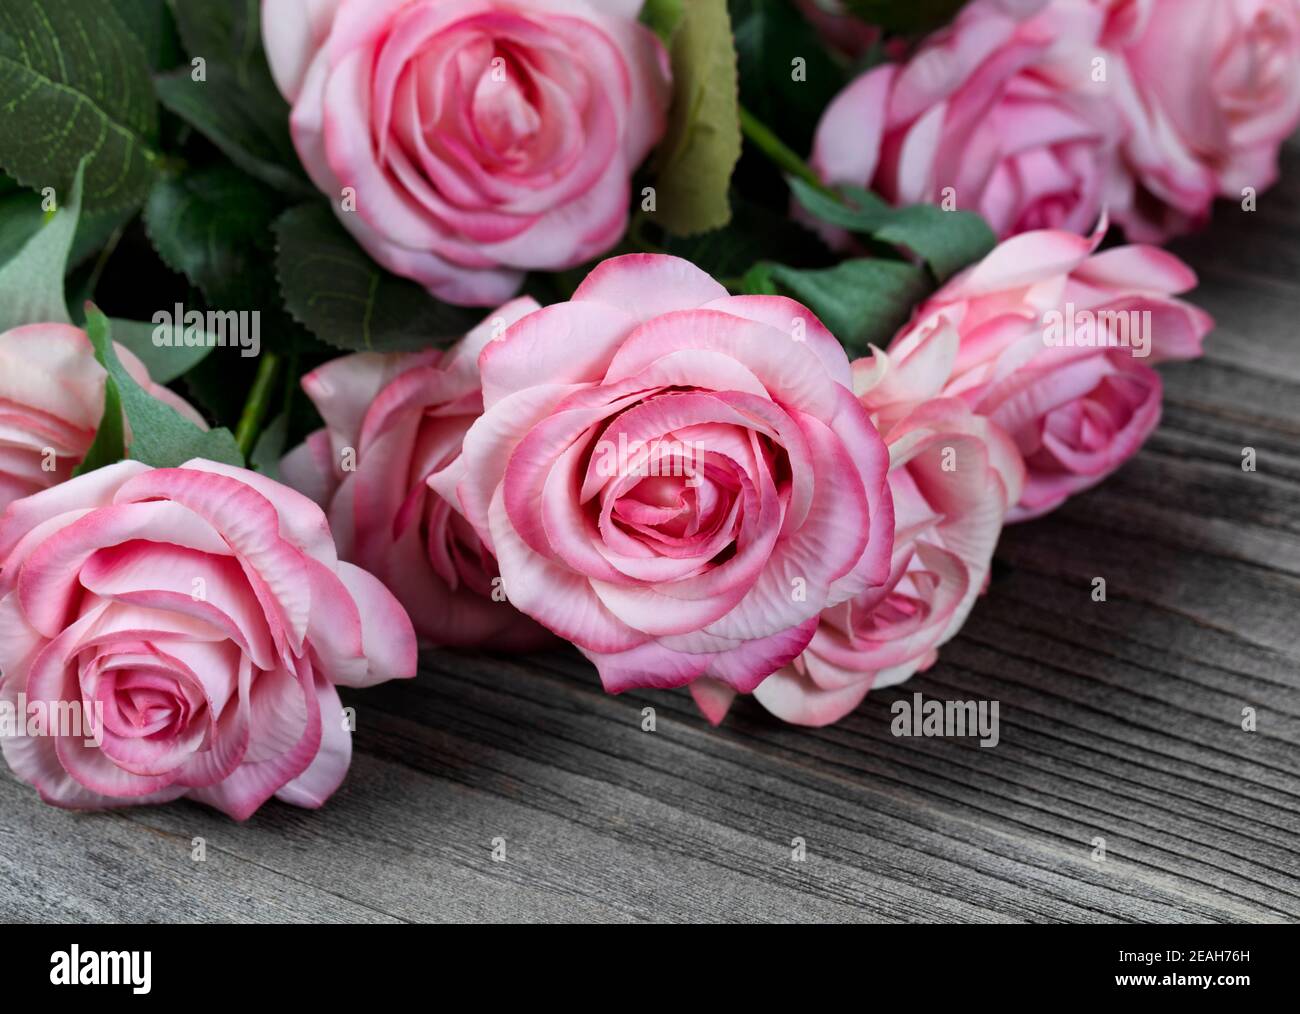 Close up of a lovely pink roses amongst other roses on aged wood Stock Photo